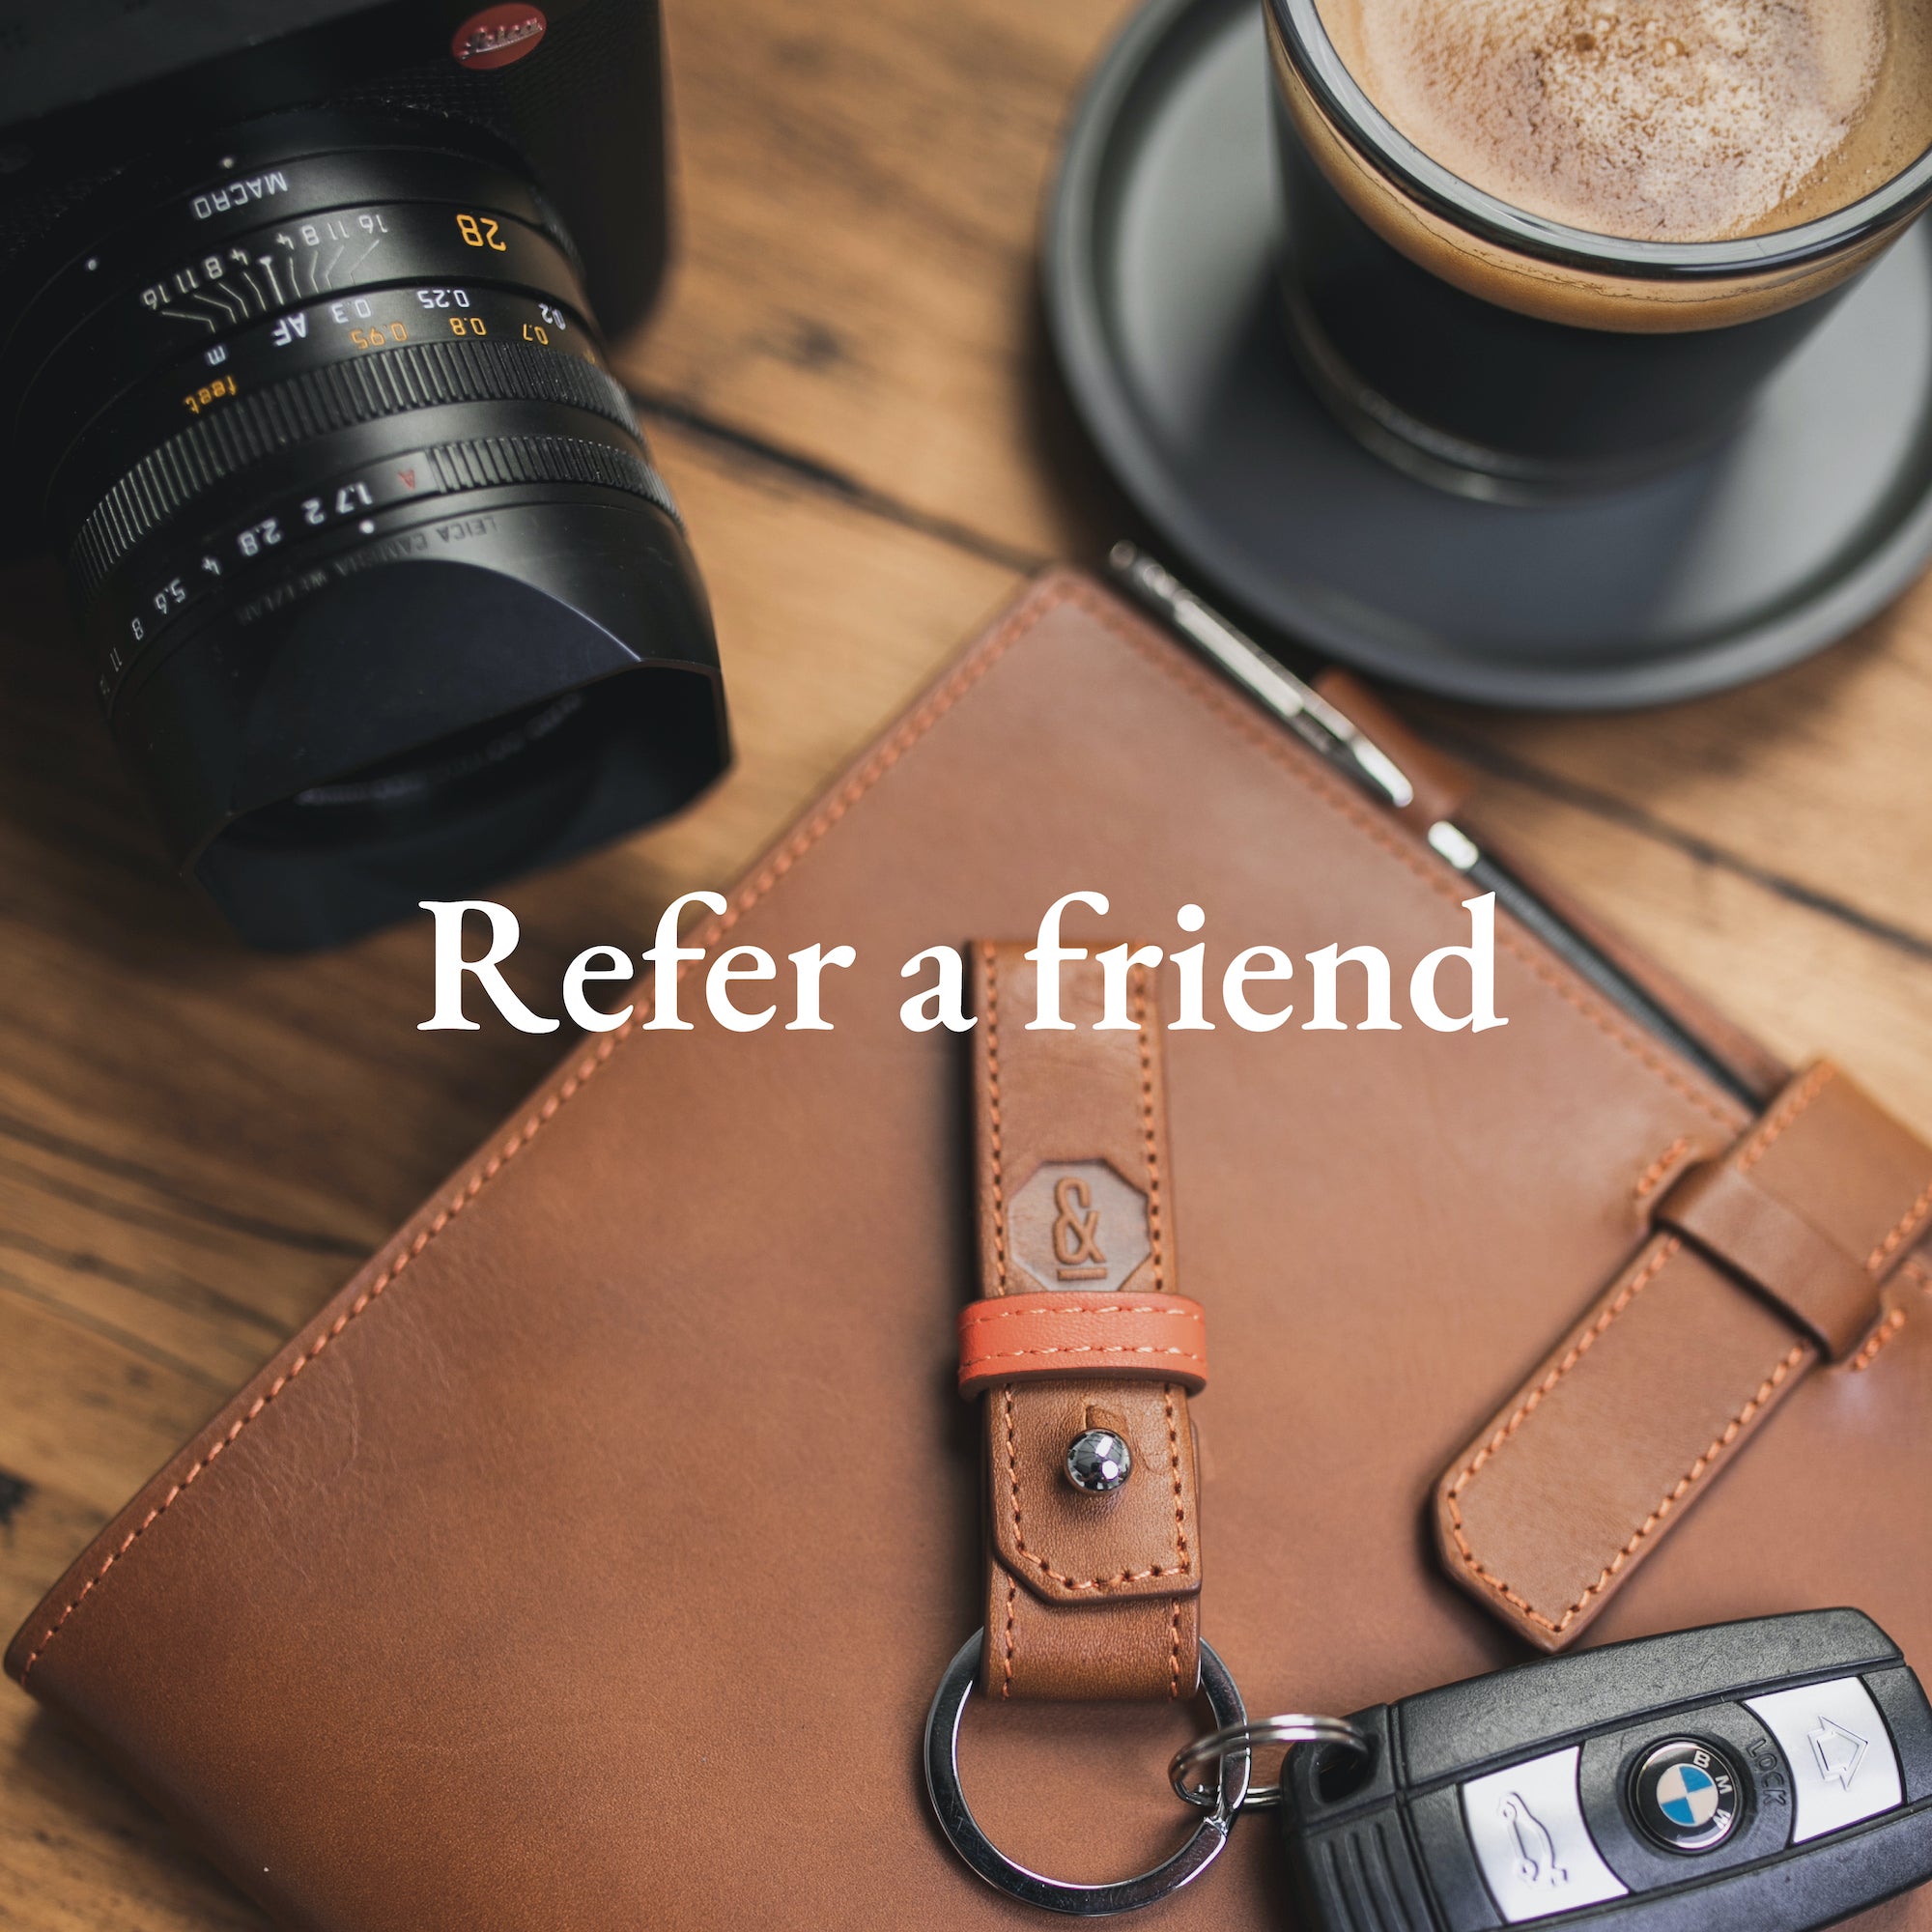 Refer a friend banner image